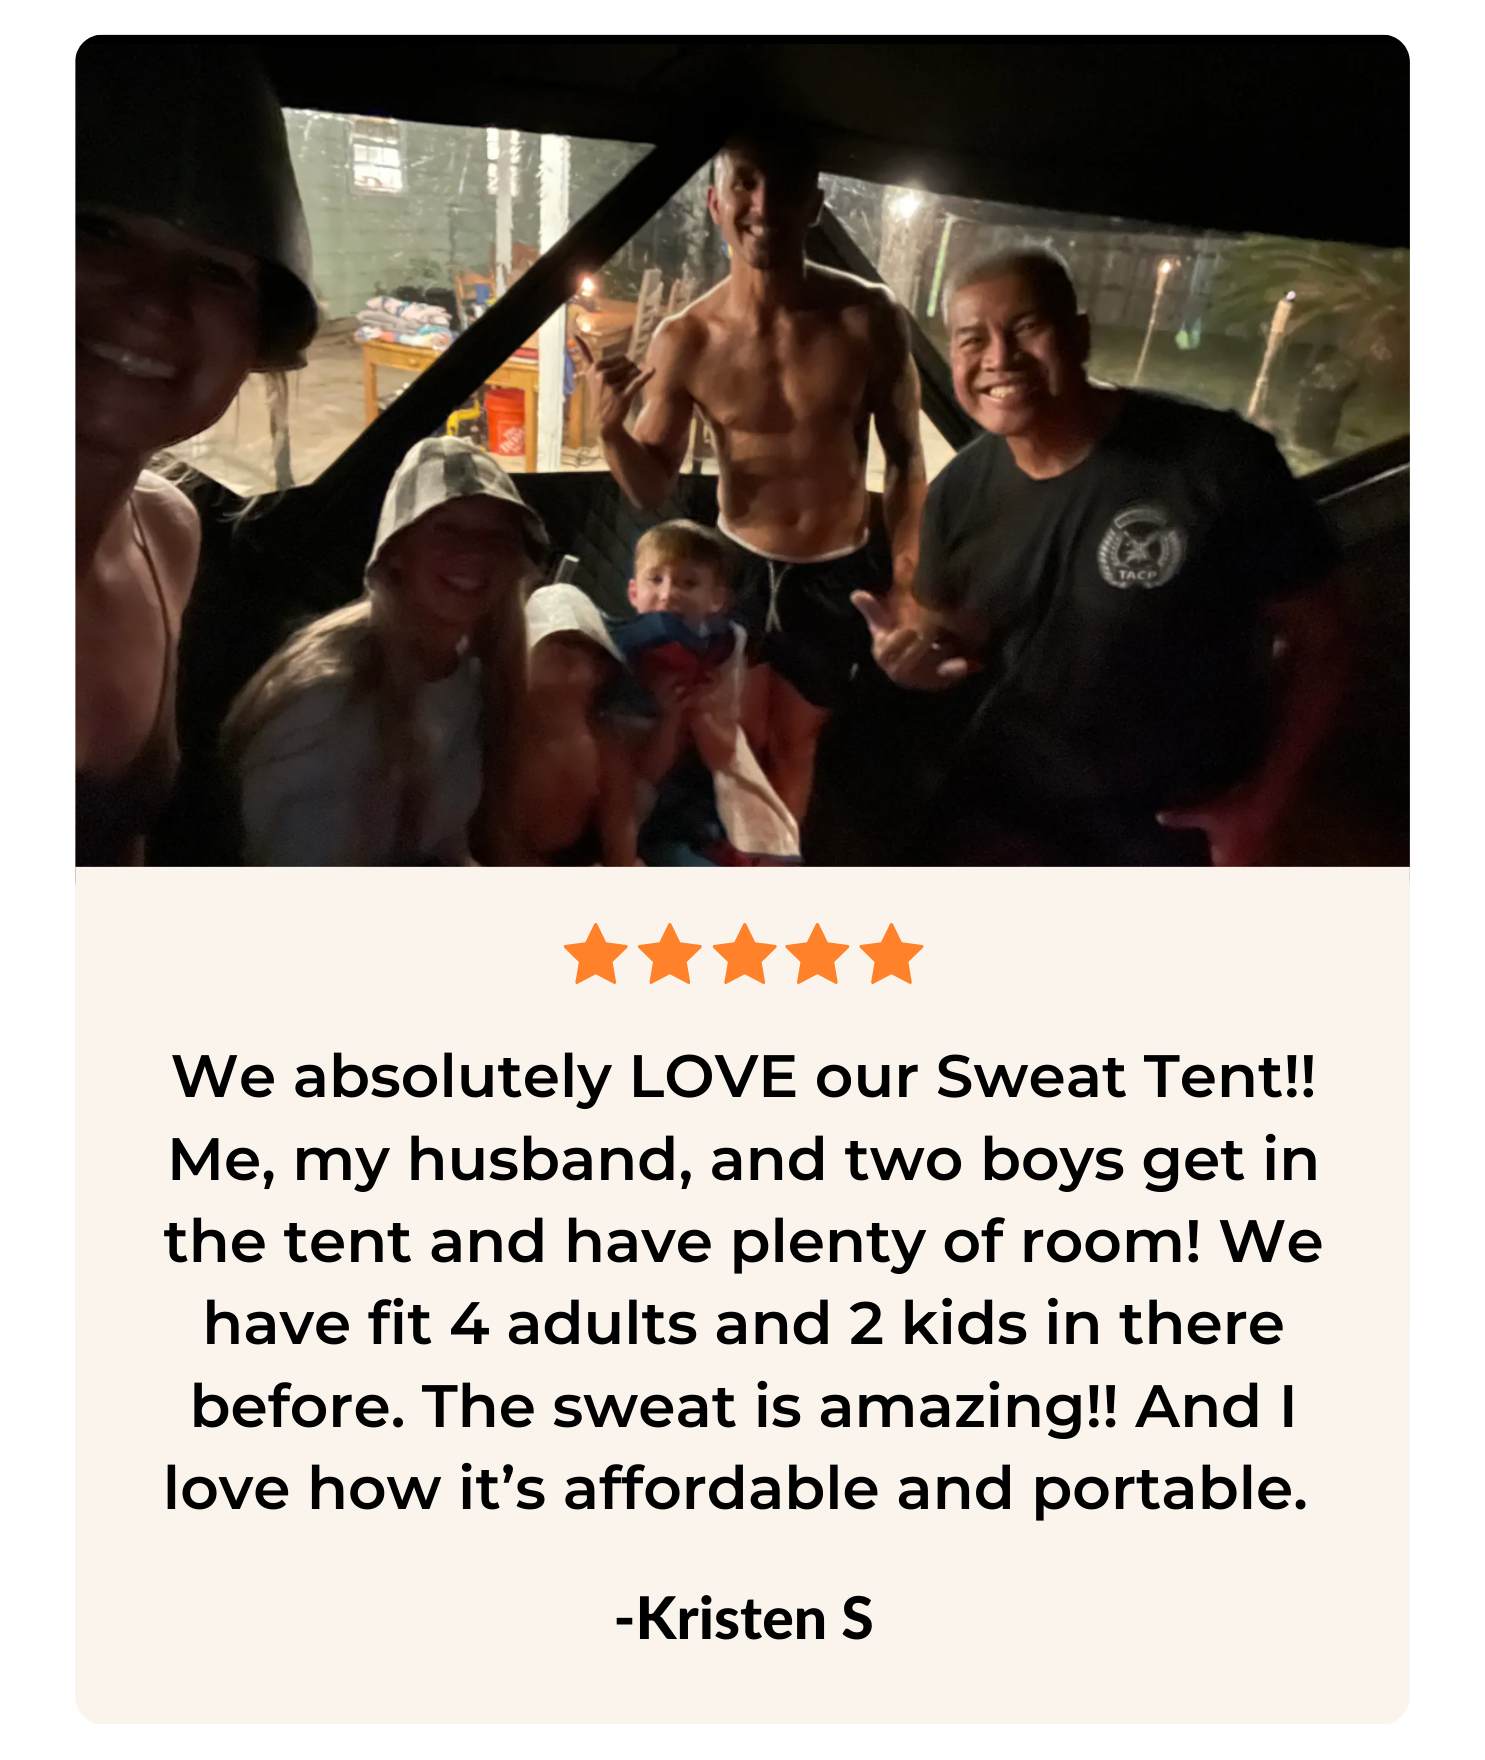 Sweat Tent review "we absolutely LOVE our Sweat Tent and have plenty of room for the family."